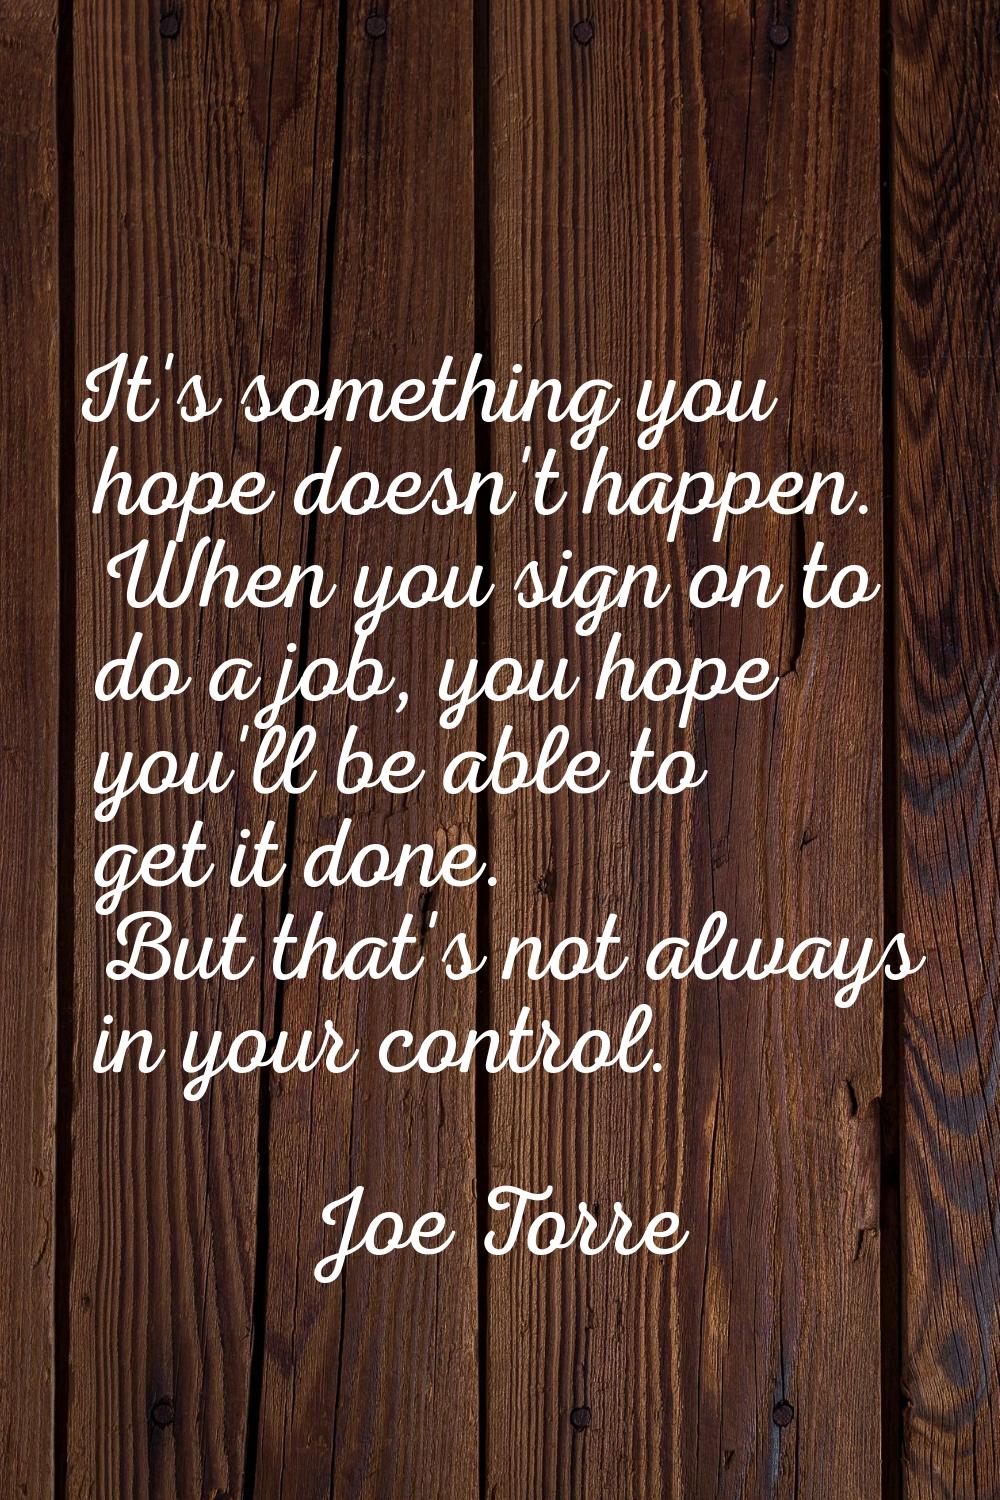 It's something you hope doesn't happen. When you sign on to do a job, you hope you'll be able to ge